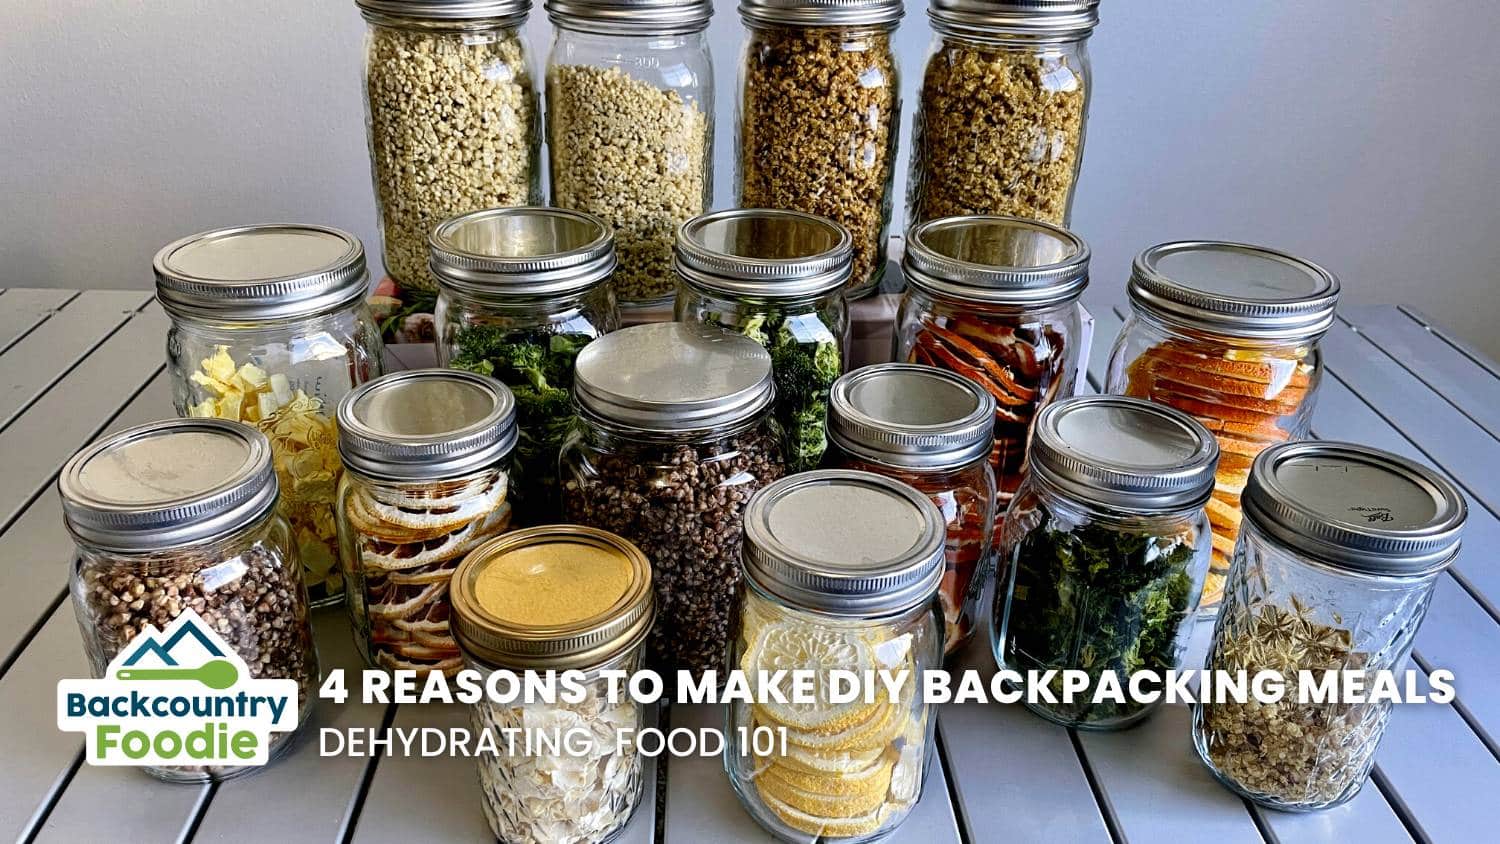 Backcountry Foodie Top 4 Reasons to Dehydrate Your Backpacking Meals Dehydrating Food 101 blog thumbnail